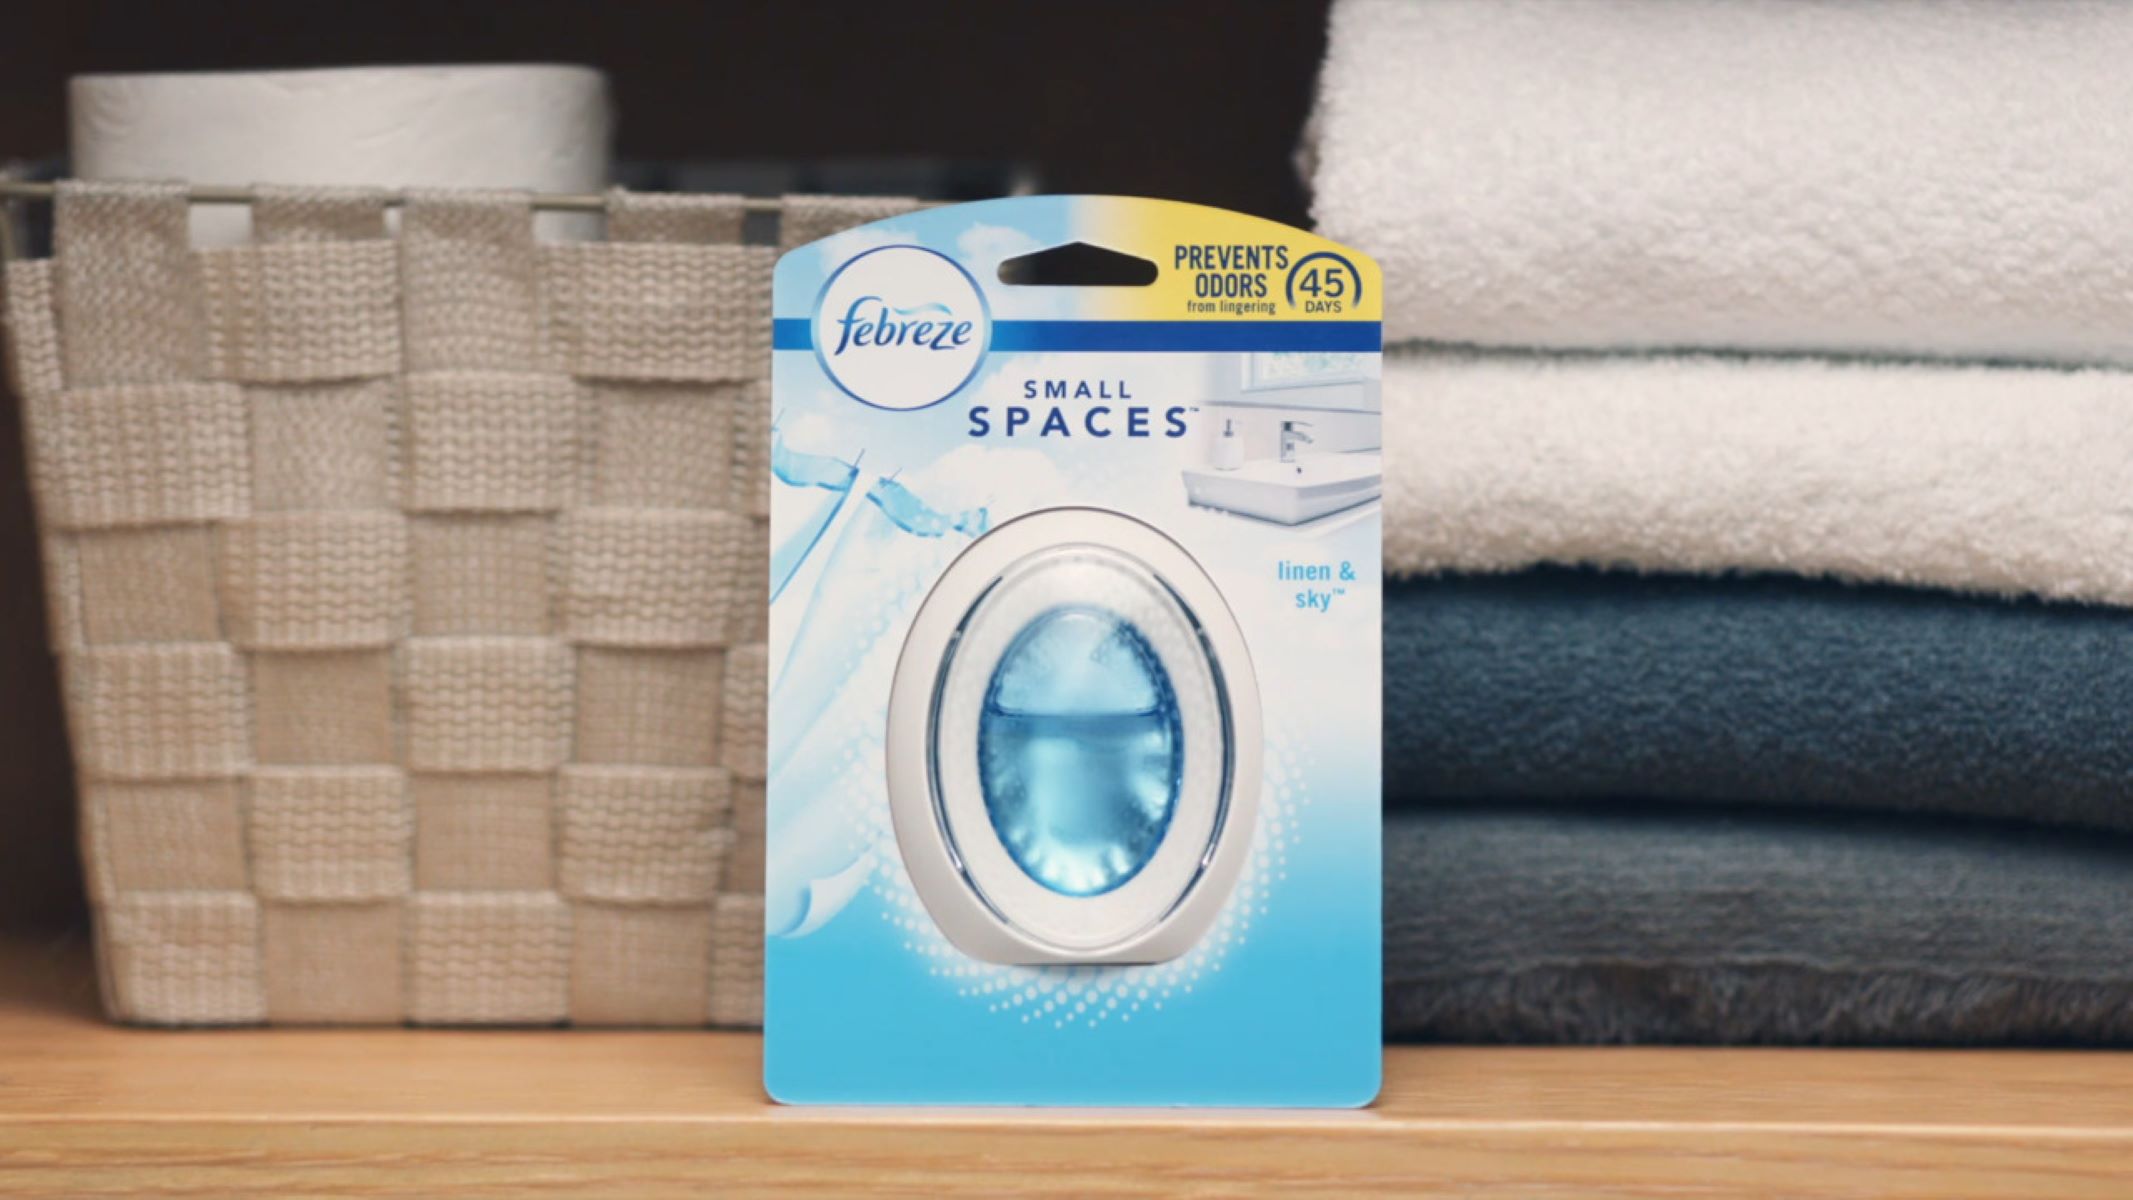 Small Space Deodorizer Febreze: How To Change